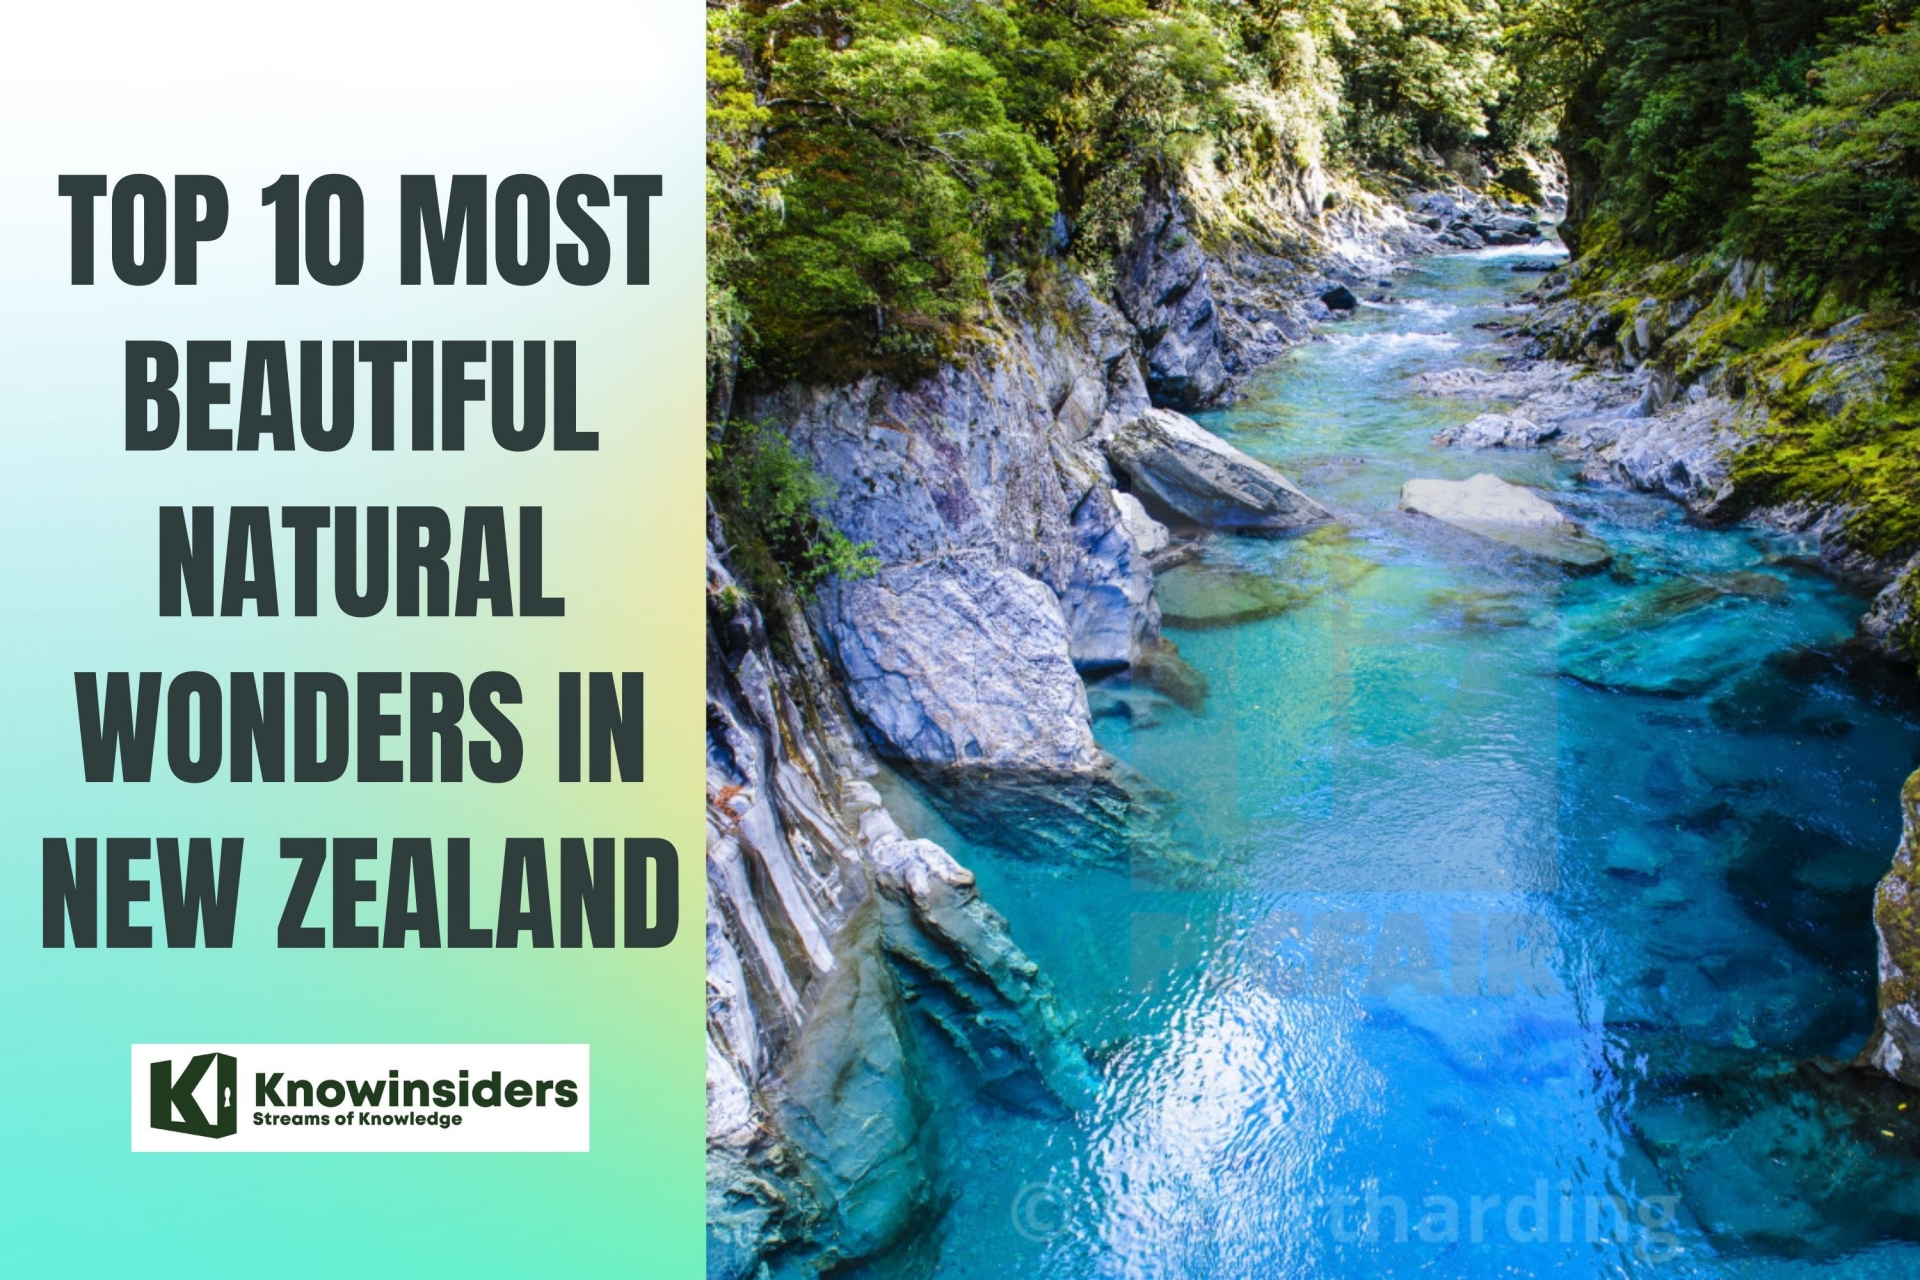 10 Unique Natural Wonders in New Zealand